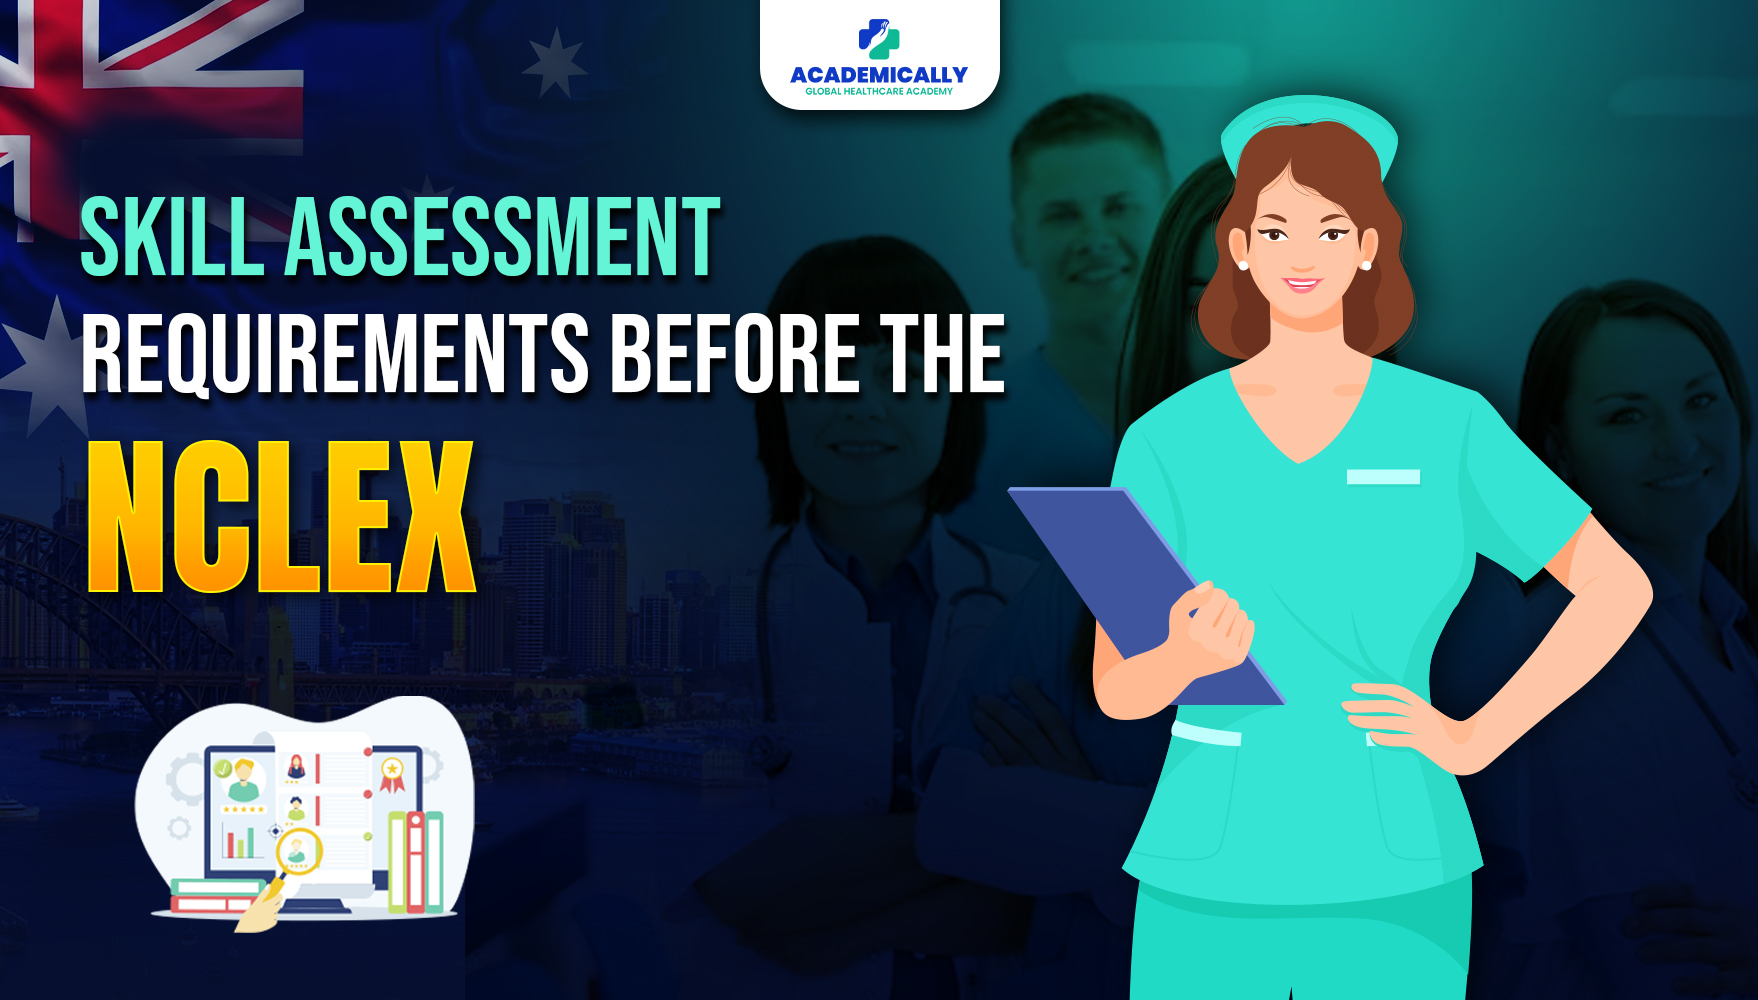 Skill Assessment Requirements Before NCLEX